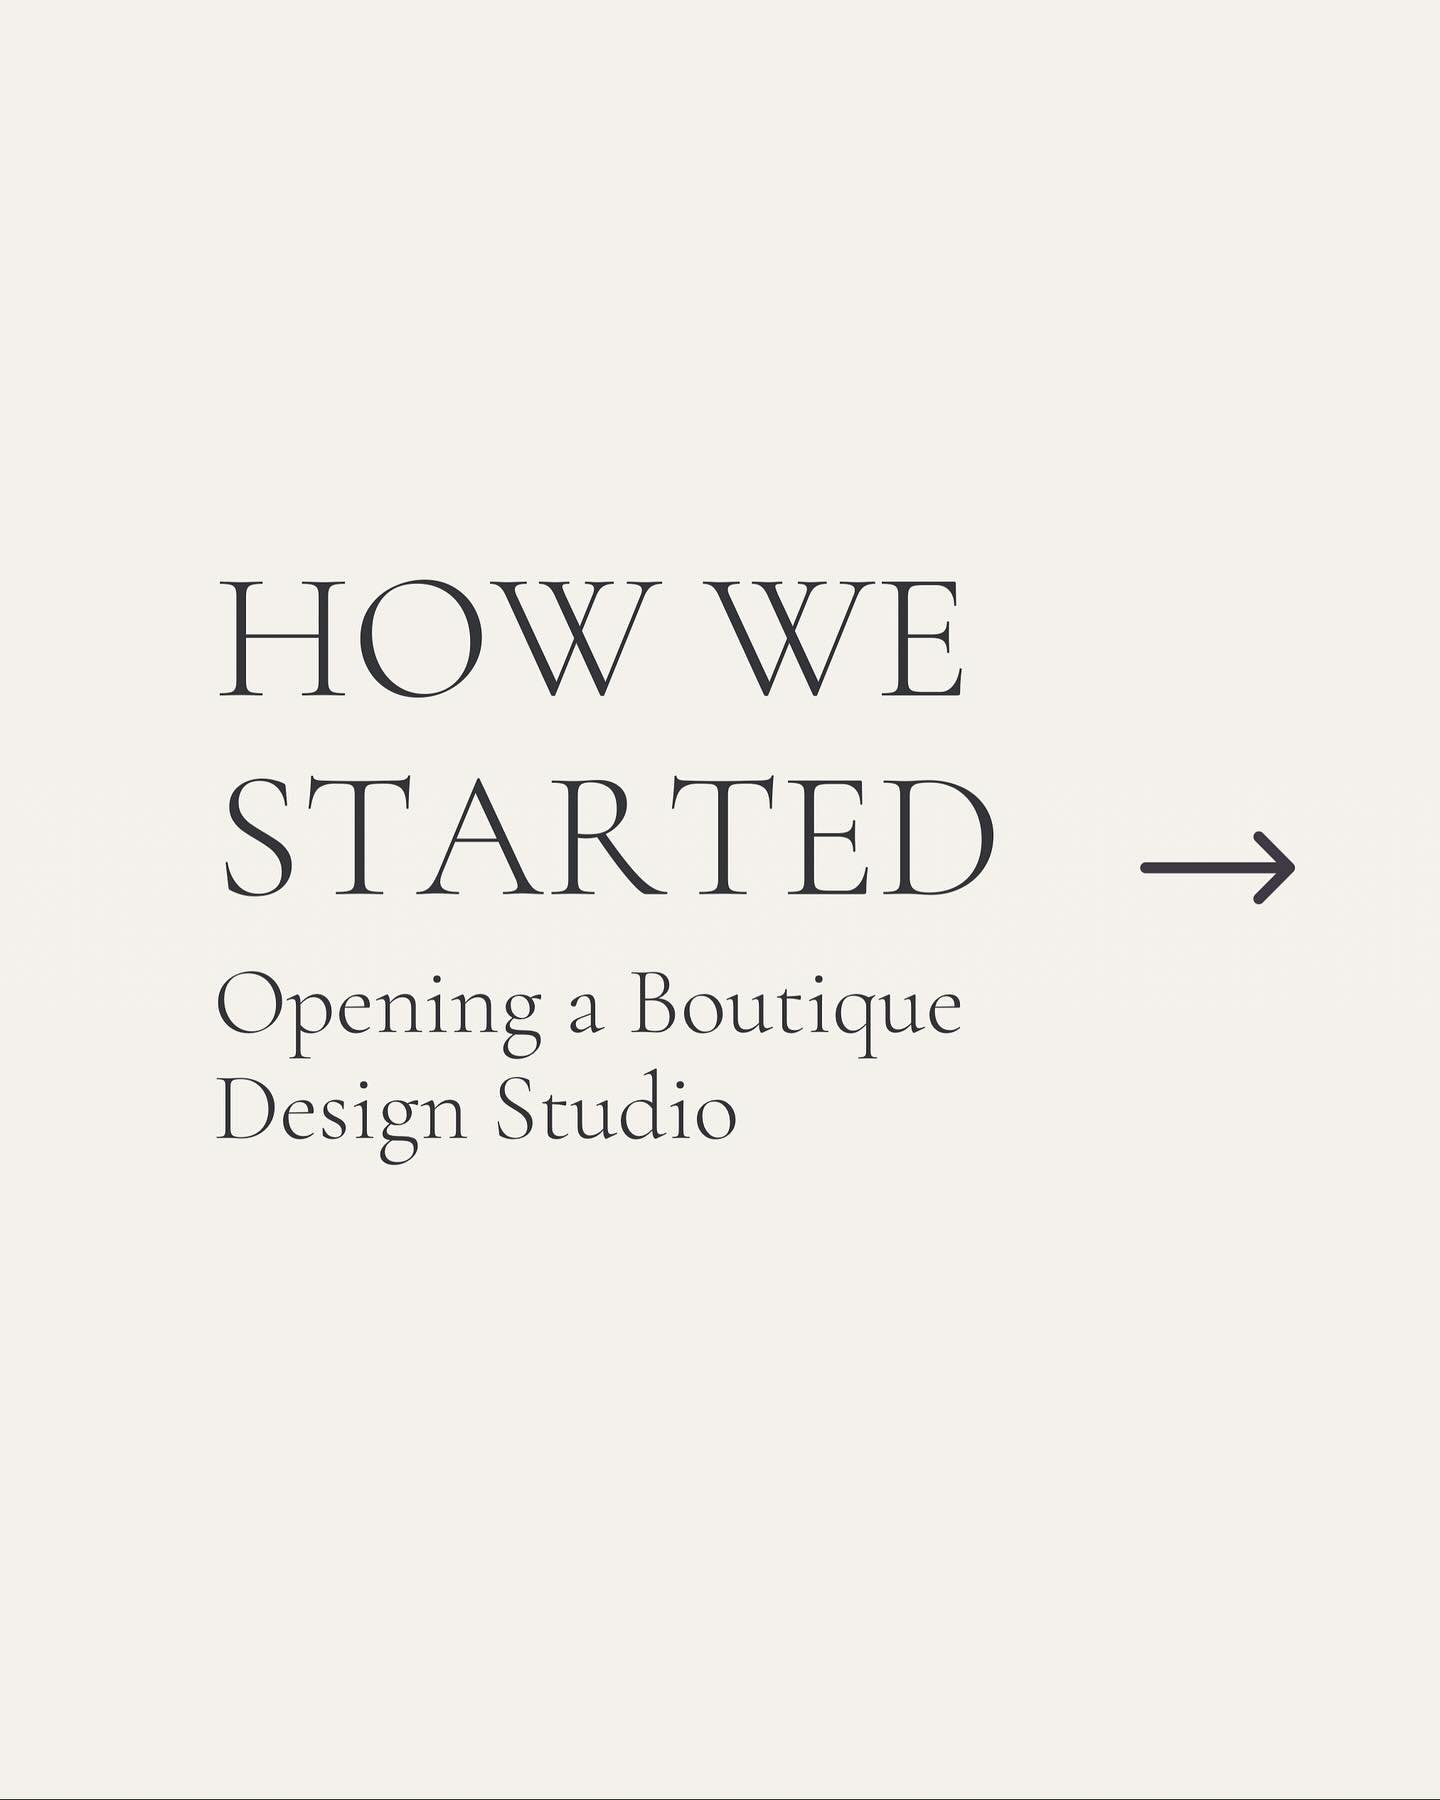 How did you get started?! Your company&rsquo;s success and customer engagement heavily depend on the story you tell, whether it&rsquo;s personal or straightforward. It&rsquo;s quite inspiring to hear entrepreneurs share how they got started.⁠
⁠
One o